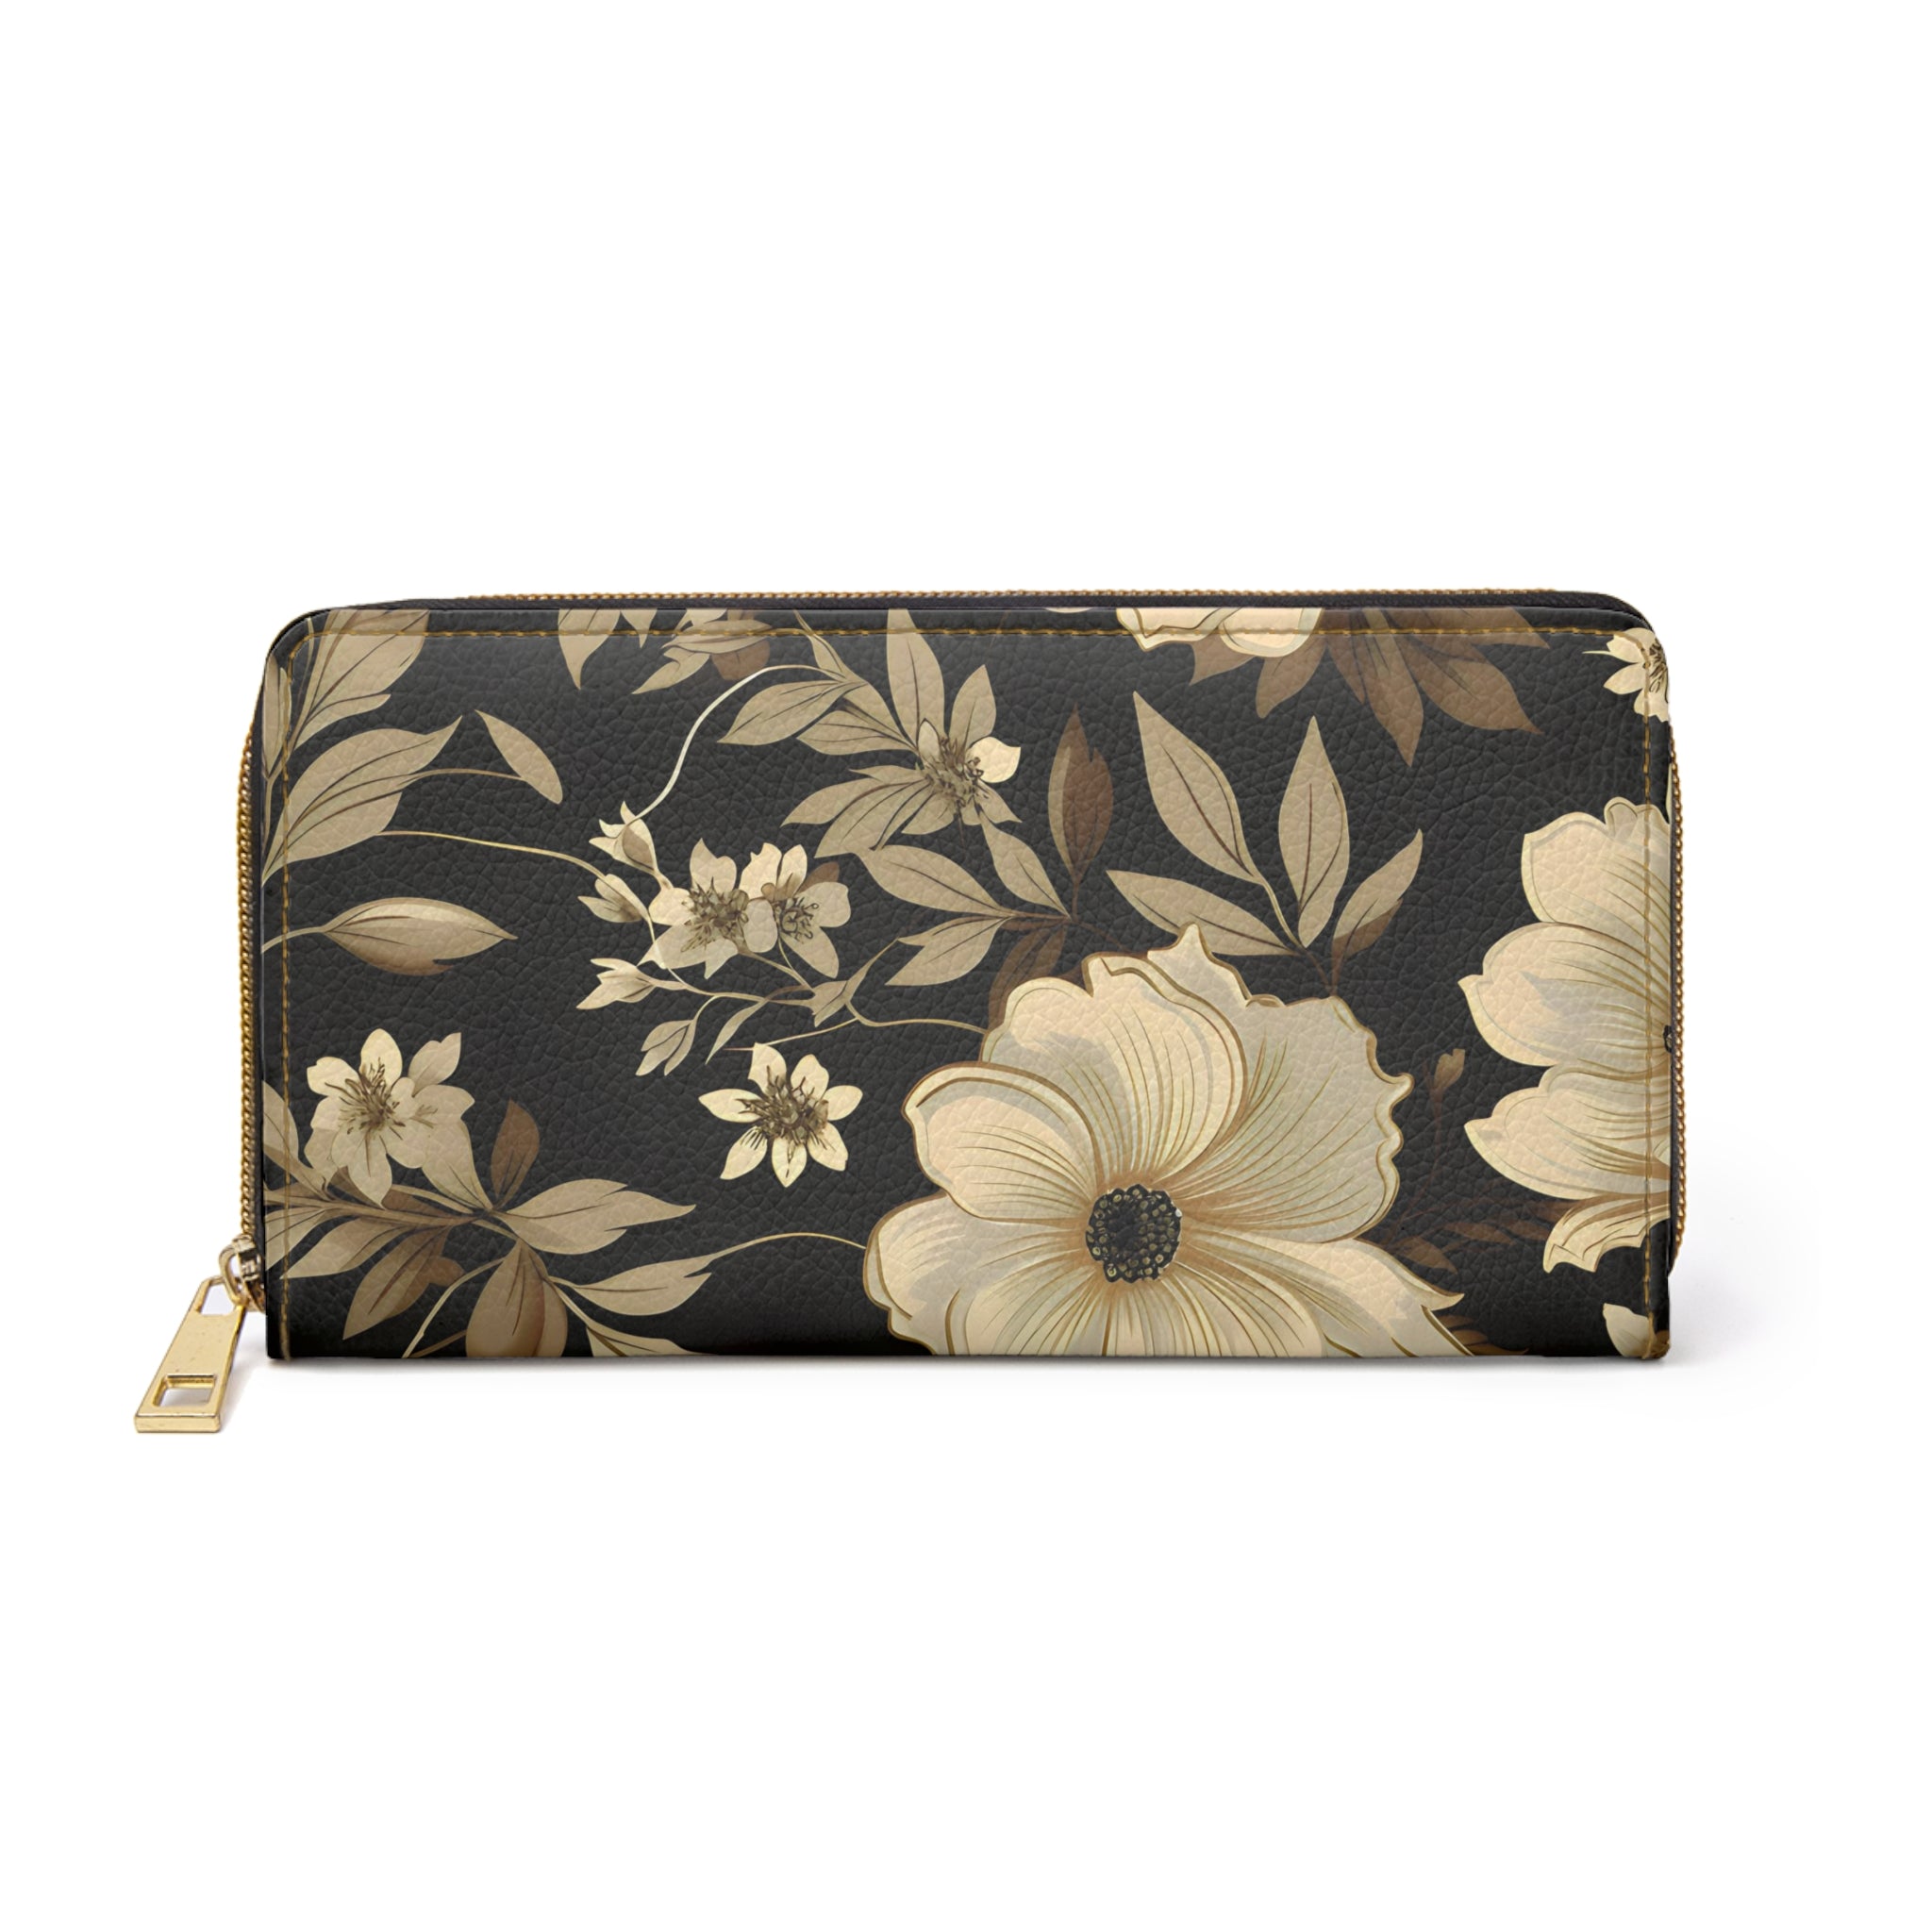 Vintage Cream Flowers and Leaves Ladies Wallet, Zipper Pouch, Coin Purse, Zippered Wallet, Cute Purse